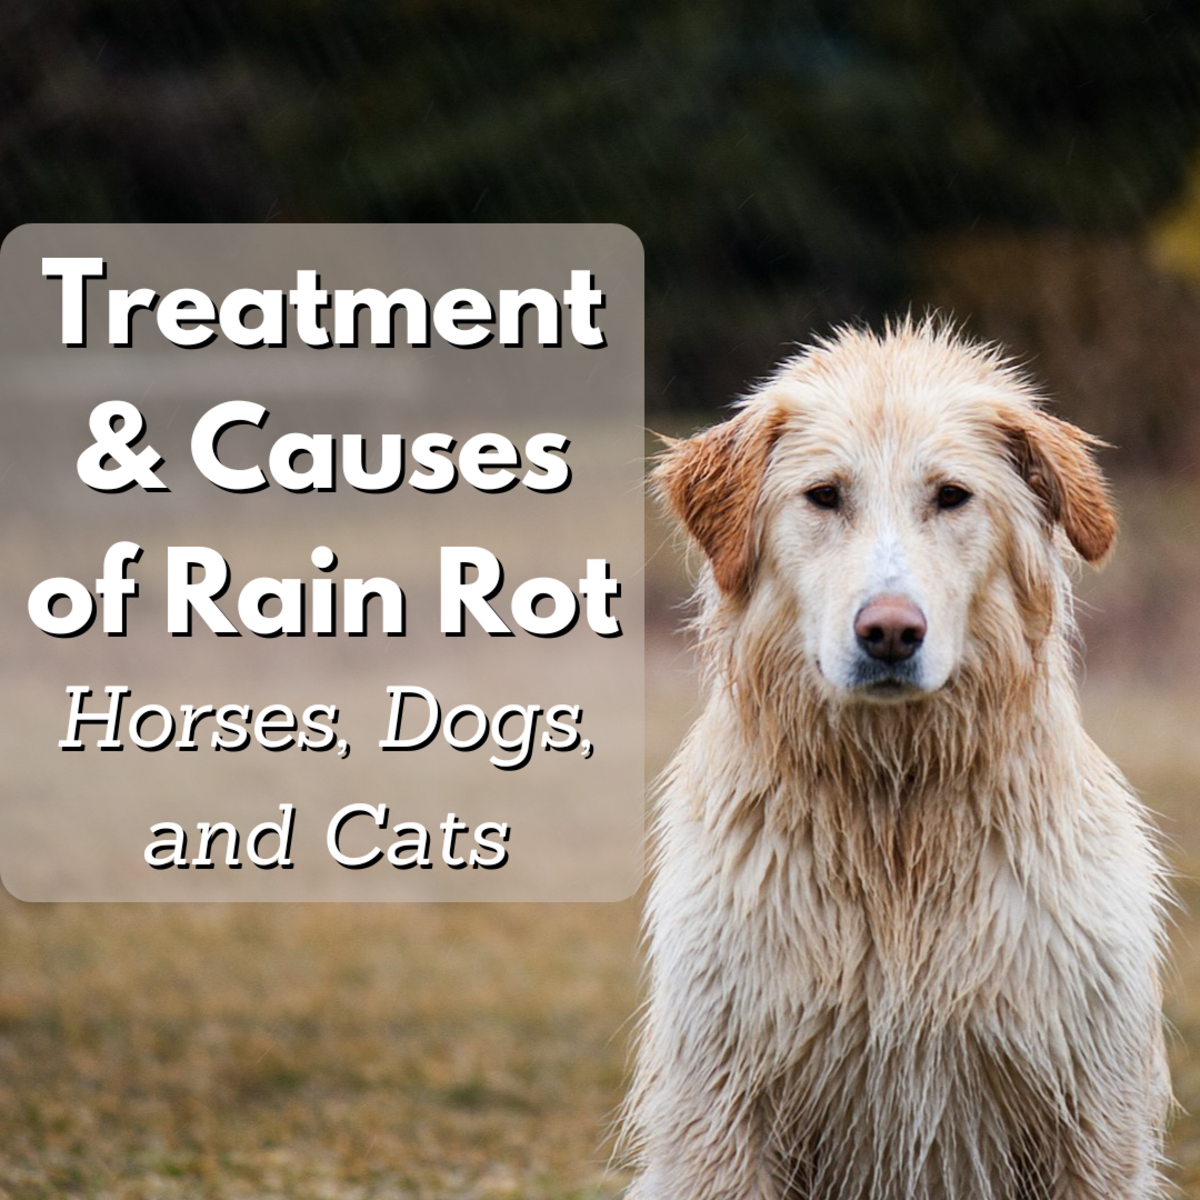 Treatment and Causes of Rain Rot in Horses, Dogs, and Cats